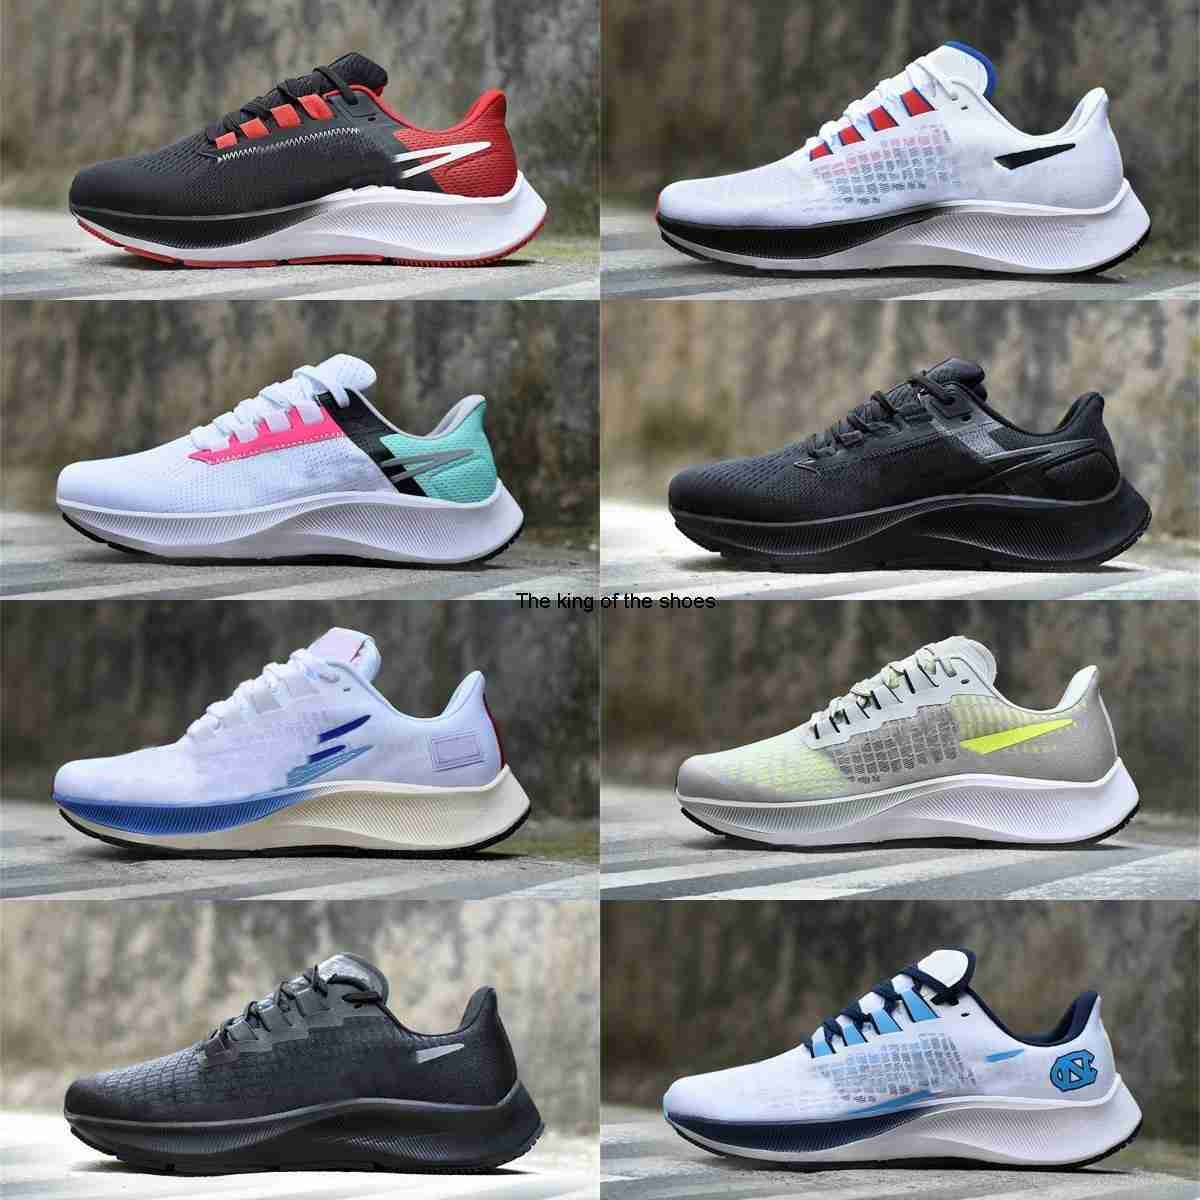 

Trainer Pegasus 37 35 Casual Sports Shoes Be True 39 Turbo ZOOM Flyease 38 Triple White Midnight Black Navy Chlorine Ribbon Multi Anthracite Designers Sneakers Y168, Z01